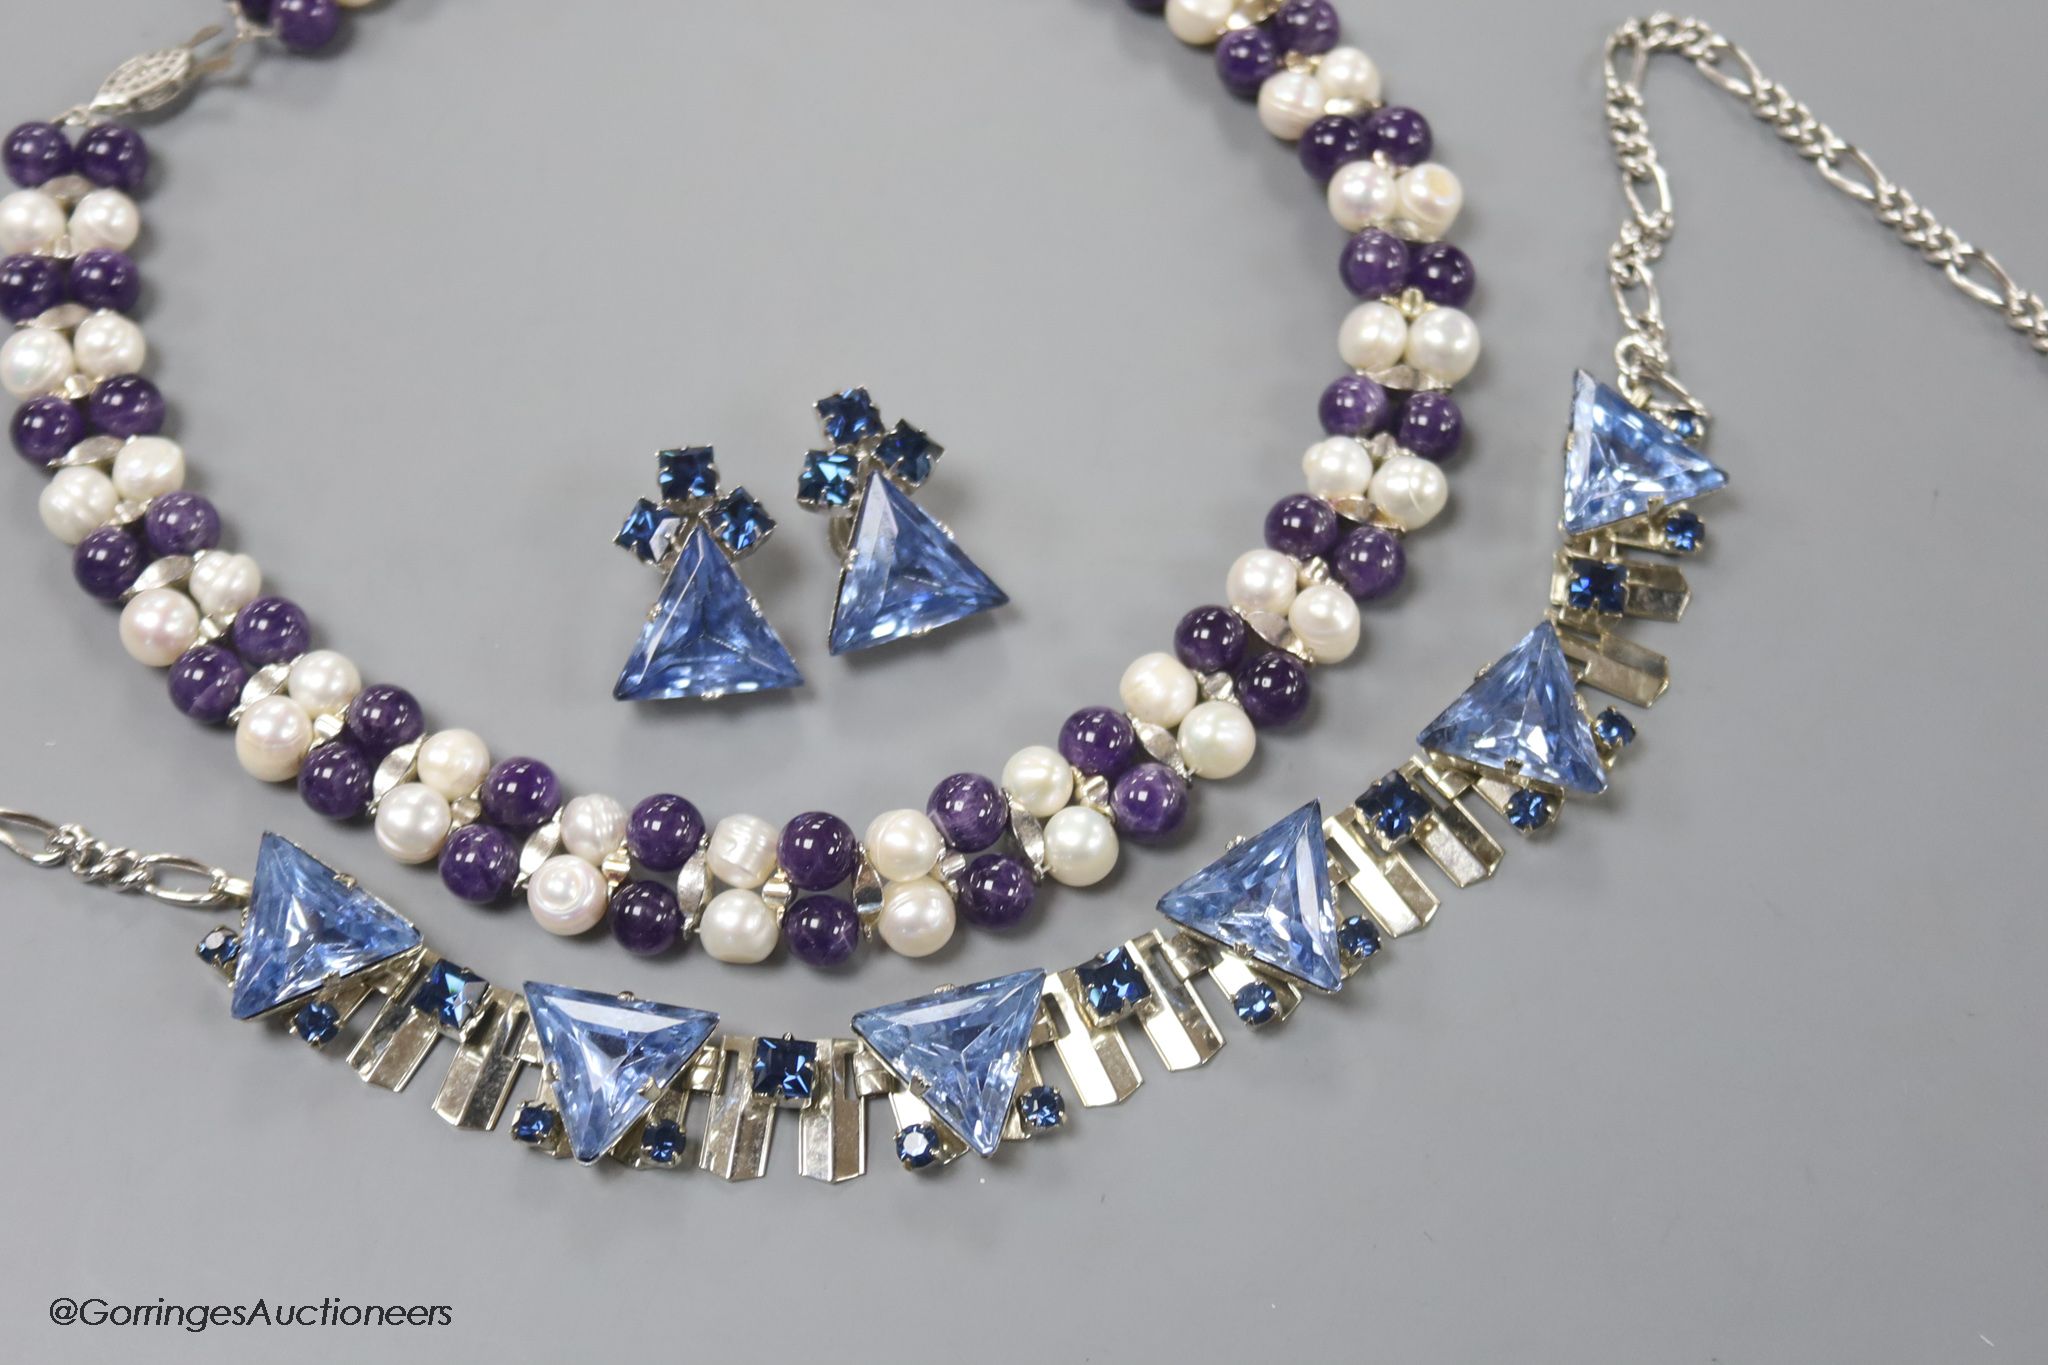 A modern amethyst bead and freshwater cultured pearls necklace and one other paste necklace and pair of earrings.